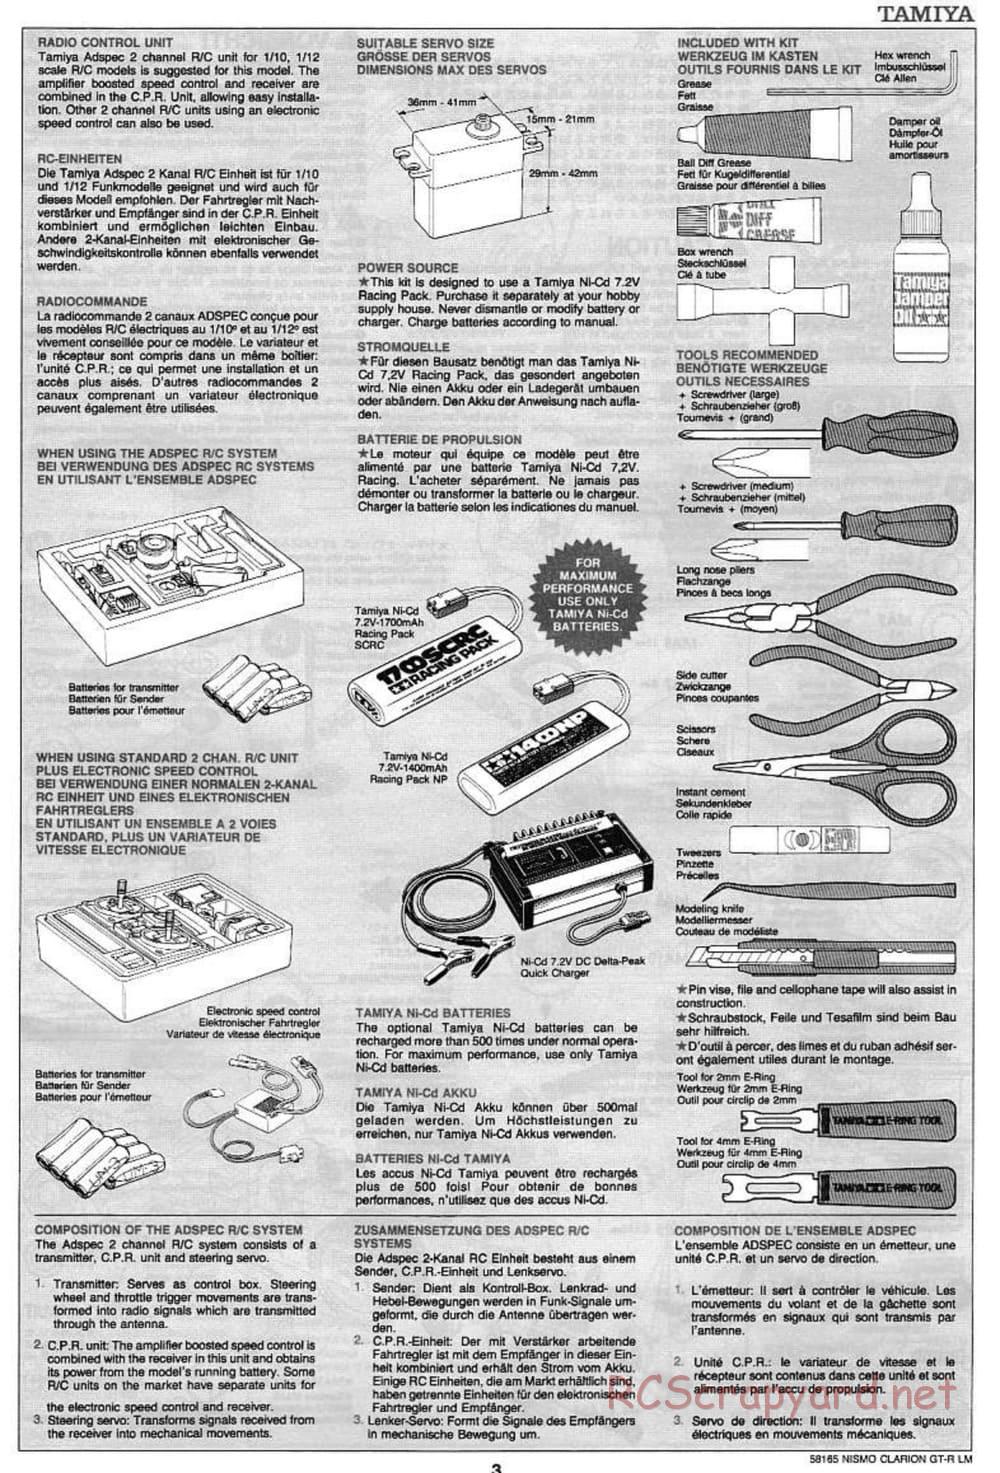 Tamiya - Nismo Clarion GT-R LM - TA-02W Chassis - Manual - Page 3